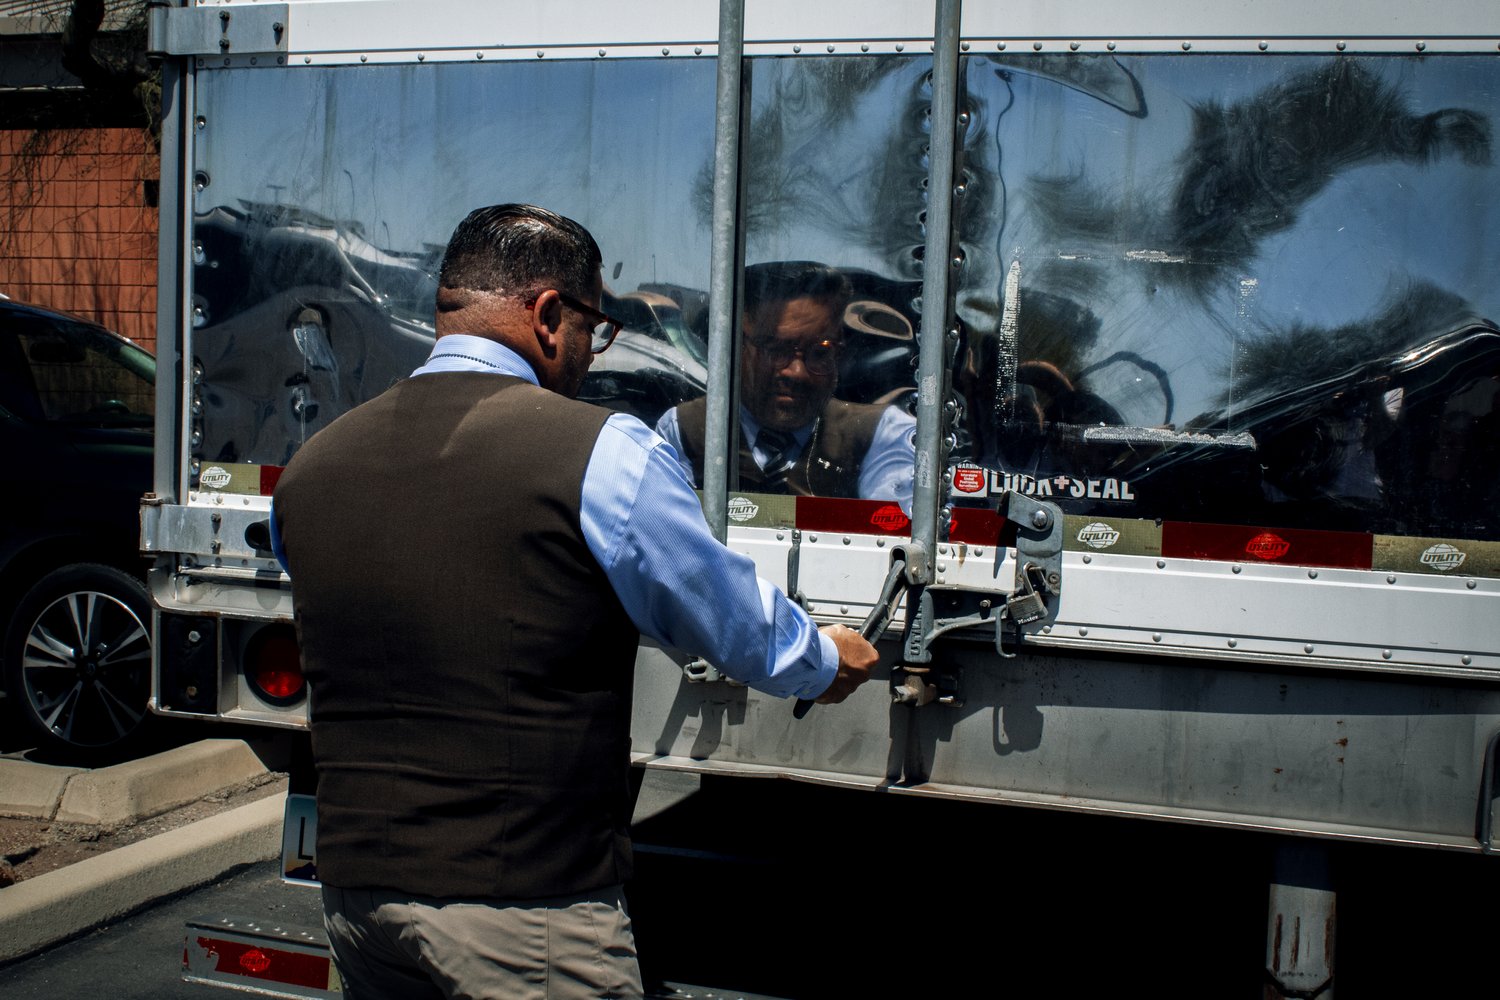 A trailer parked outside the Pima County Office of the Medical Examiner that stores boxes with the remains of migrants who died in the desert. © Andrea Godínez